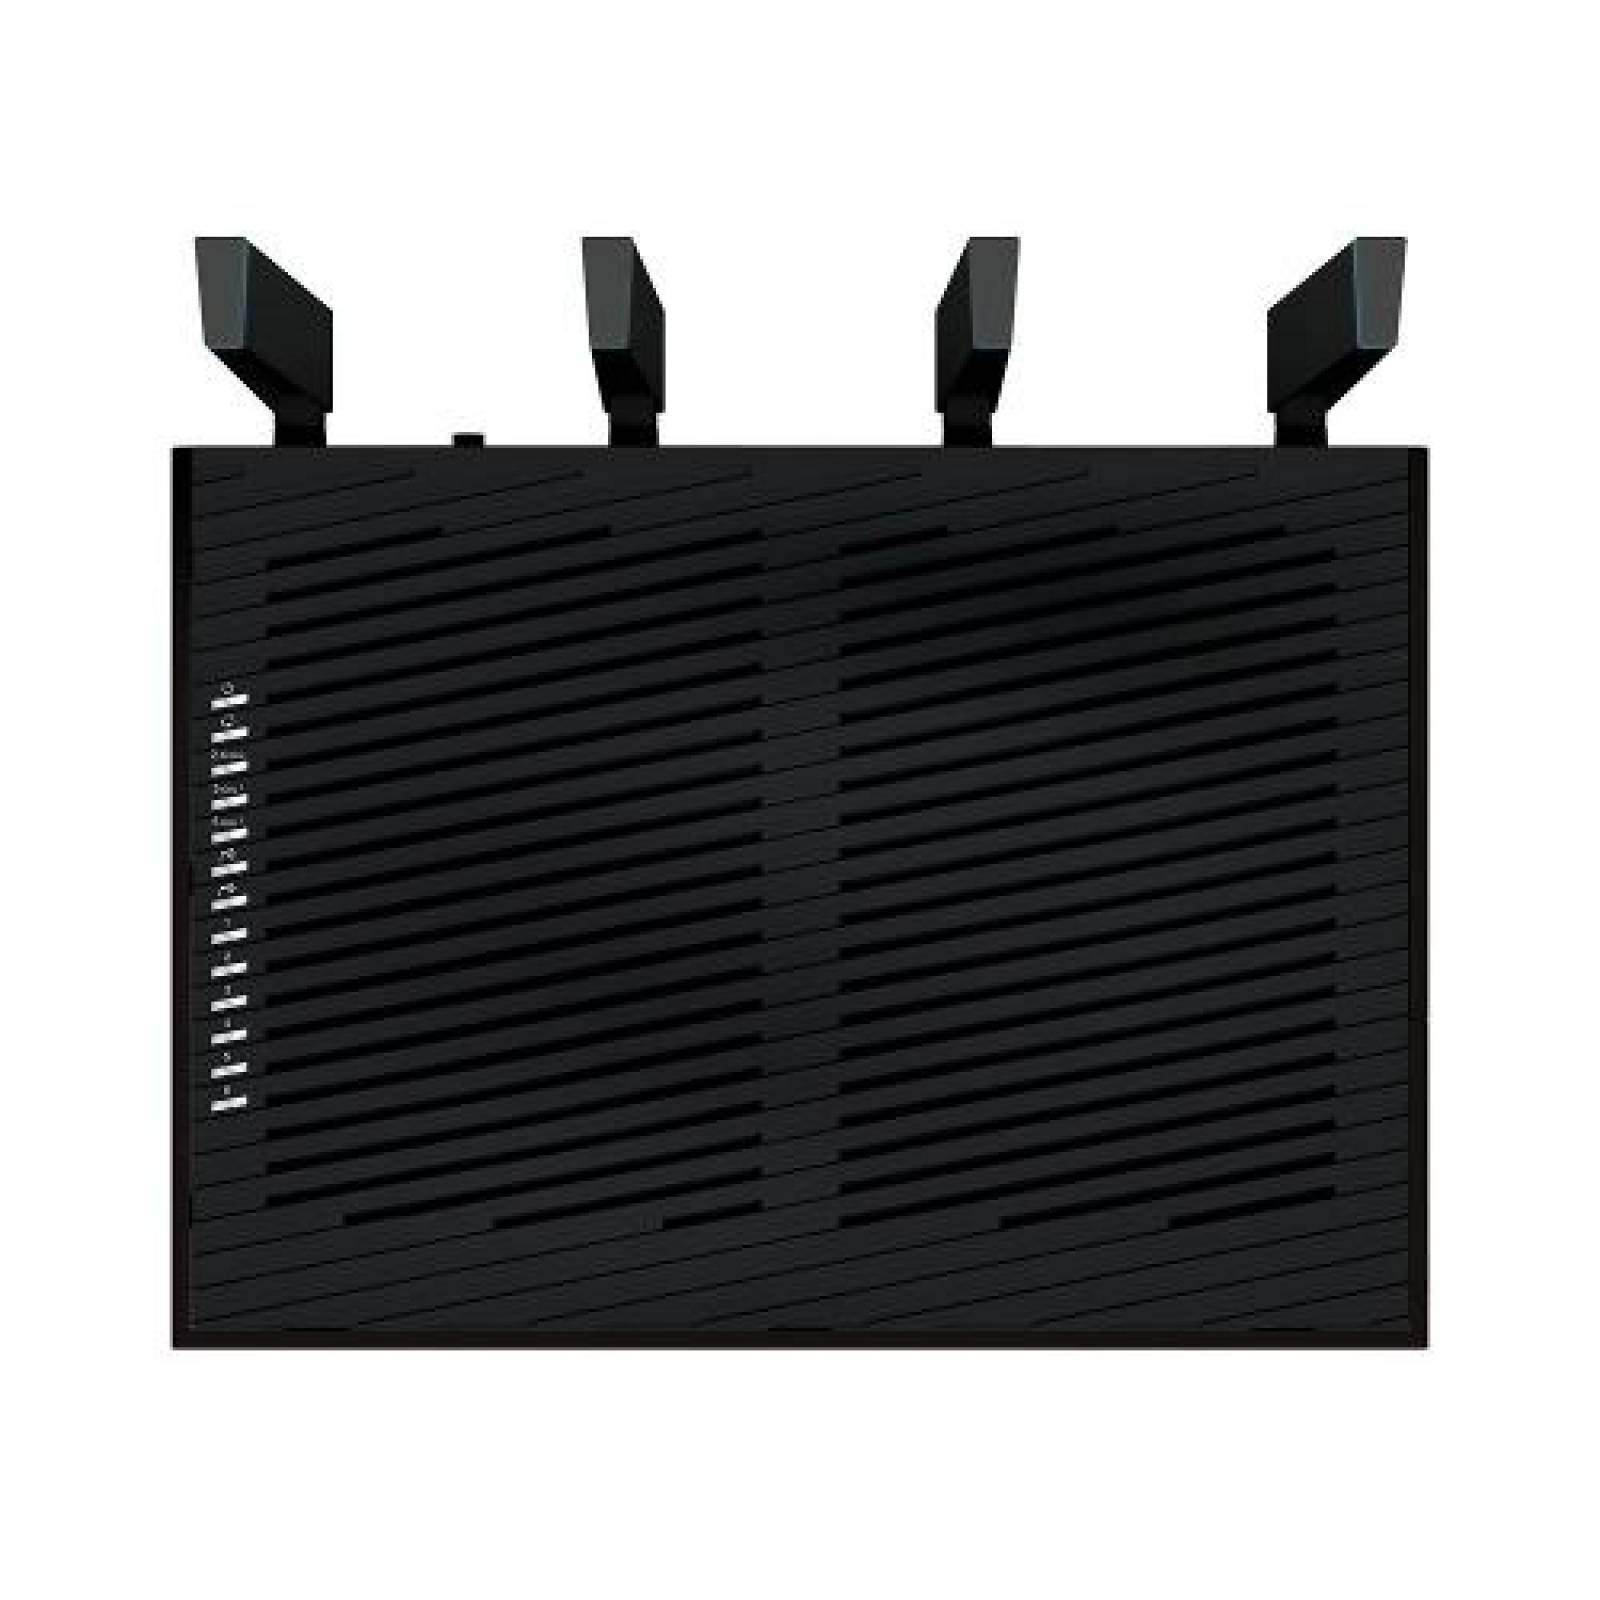 Repetidor Wifi Router Inalámbrico 7PT Tri band X8 Zyxel